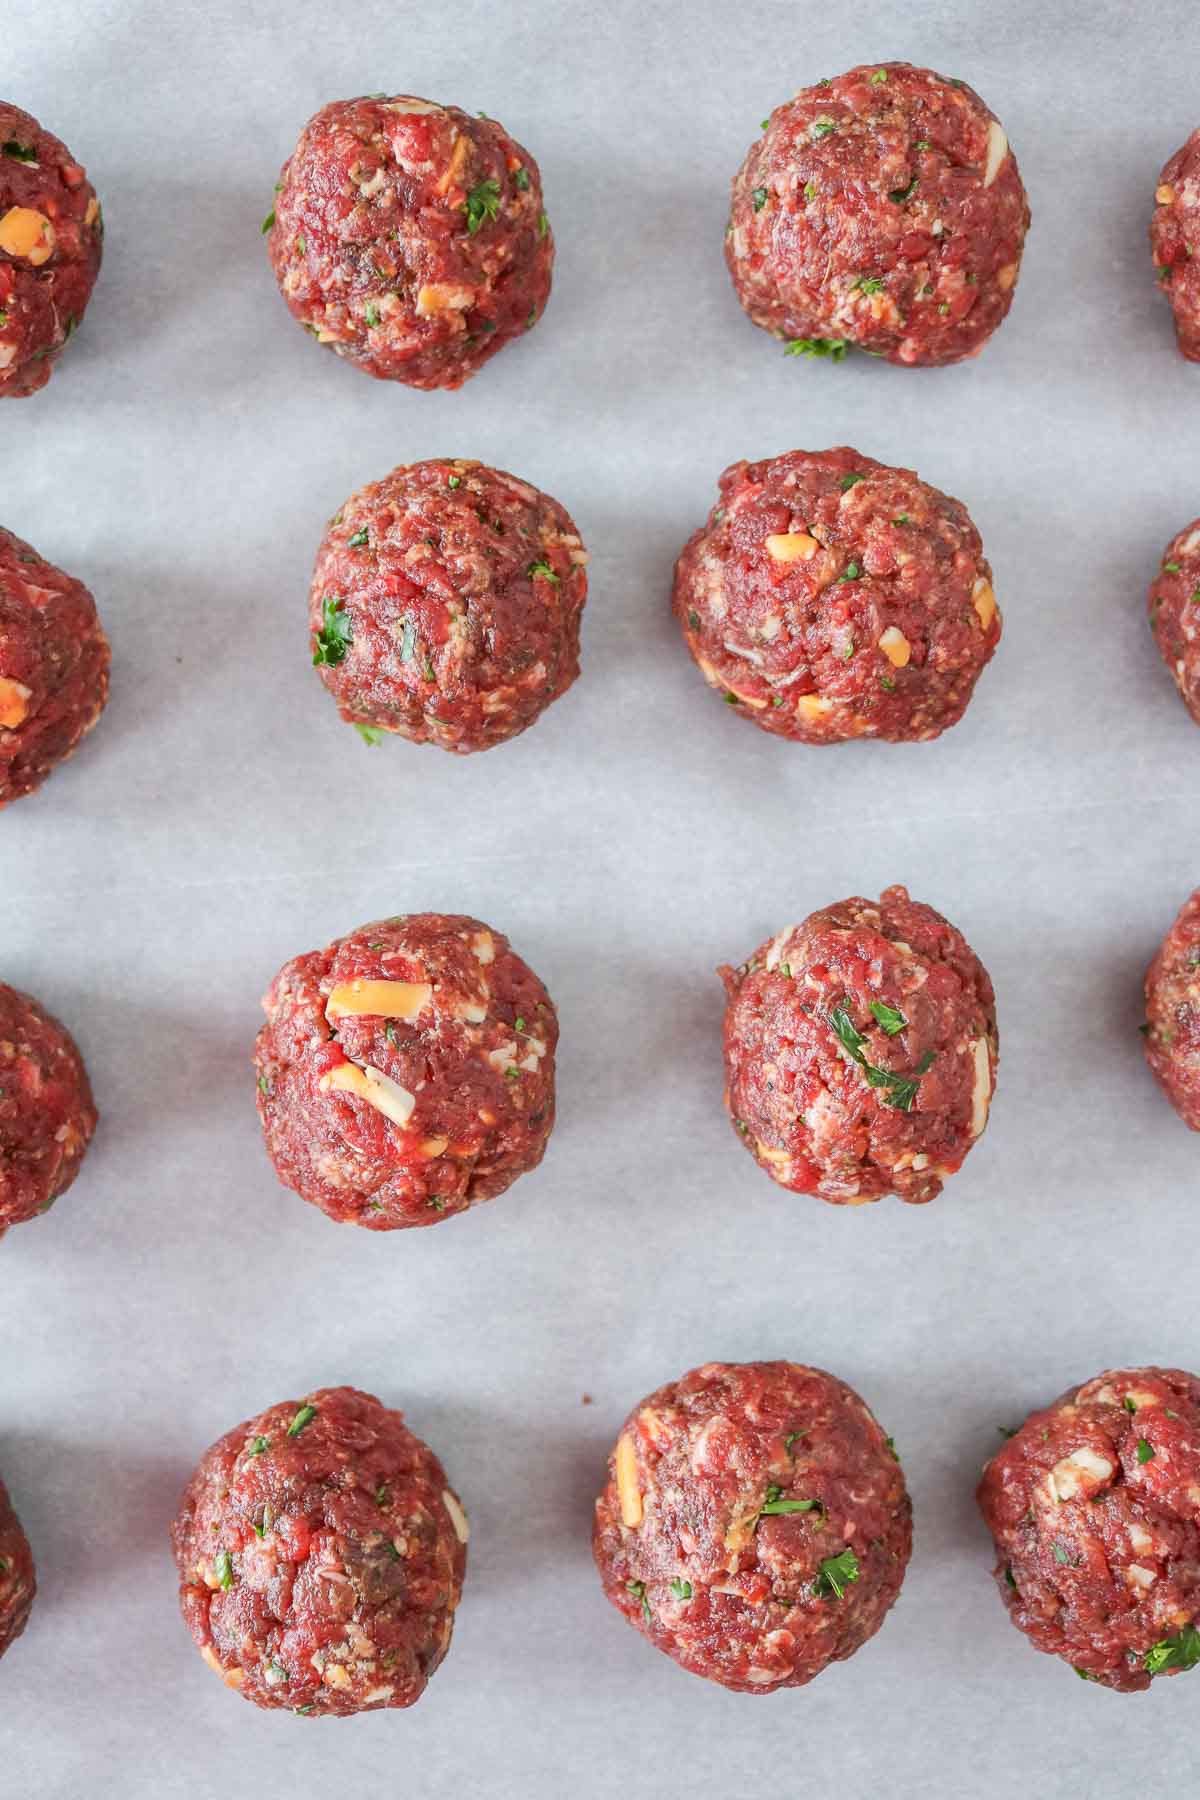 Moose meatballs on a parchment paper-lined sheet pan before cooking.